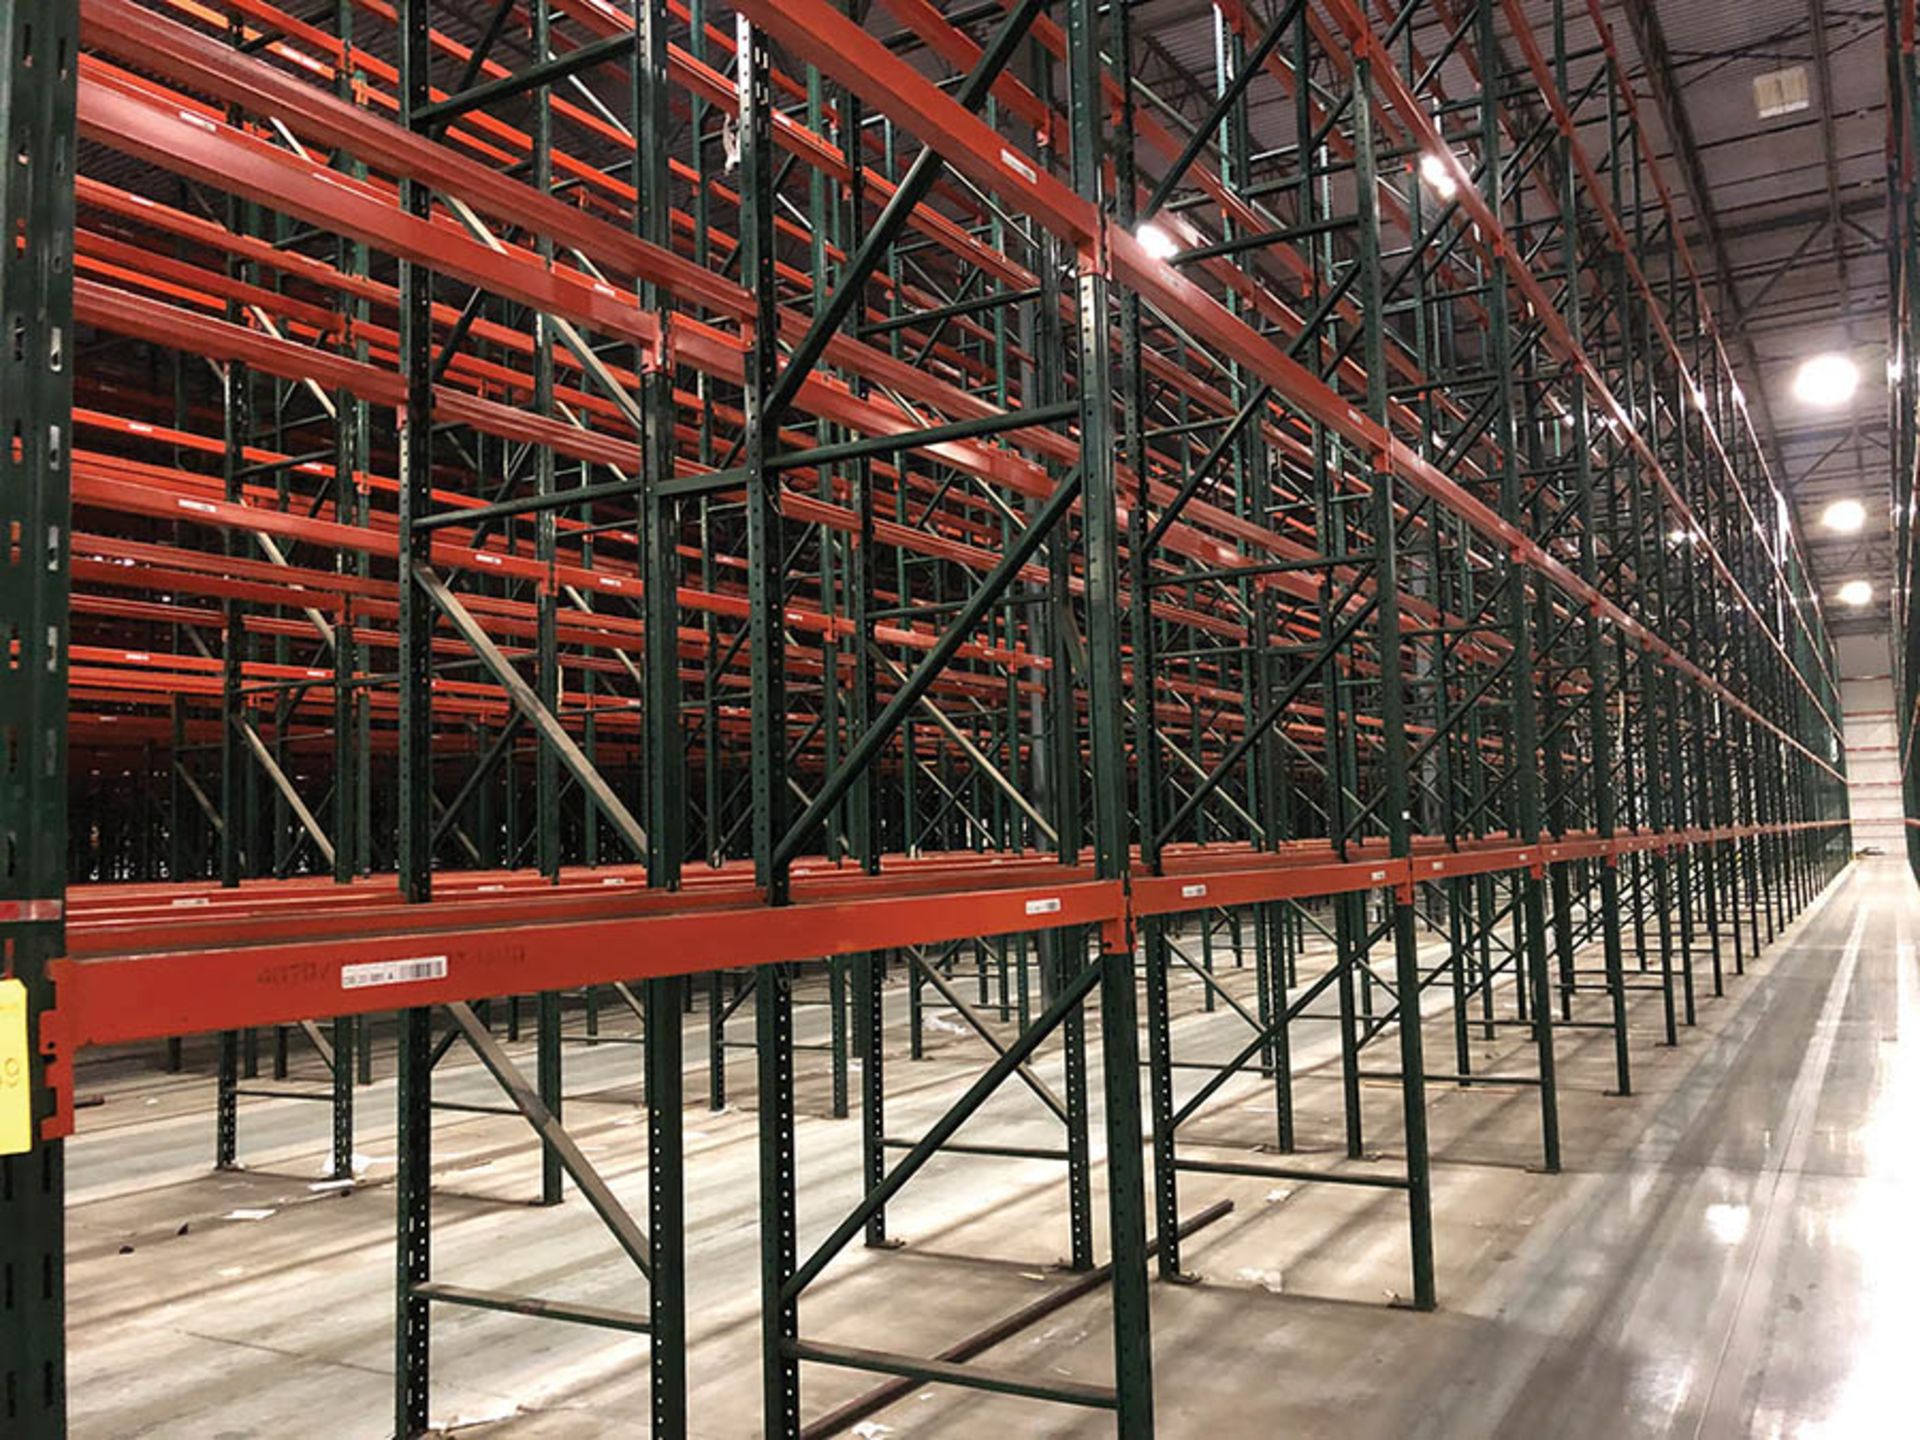 (30) BAYS/SECTIONS OF RIDG-U-RAK PALLET RACKING, CONSISTING OF (31) TOTAL UPRIGHTS- (2) UPRIGHTS ARE